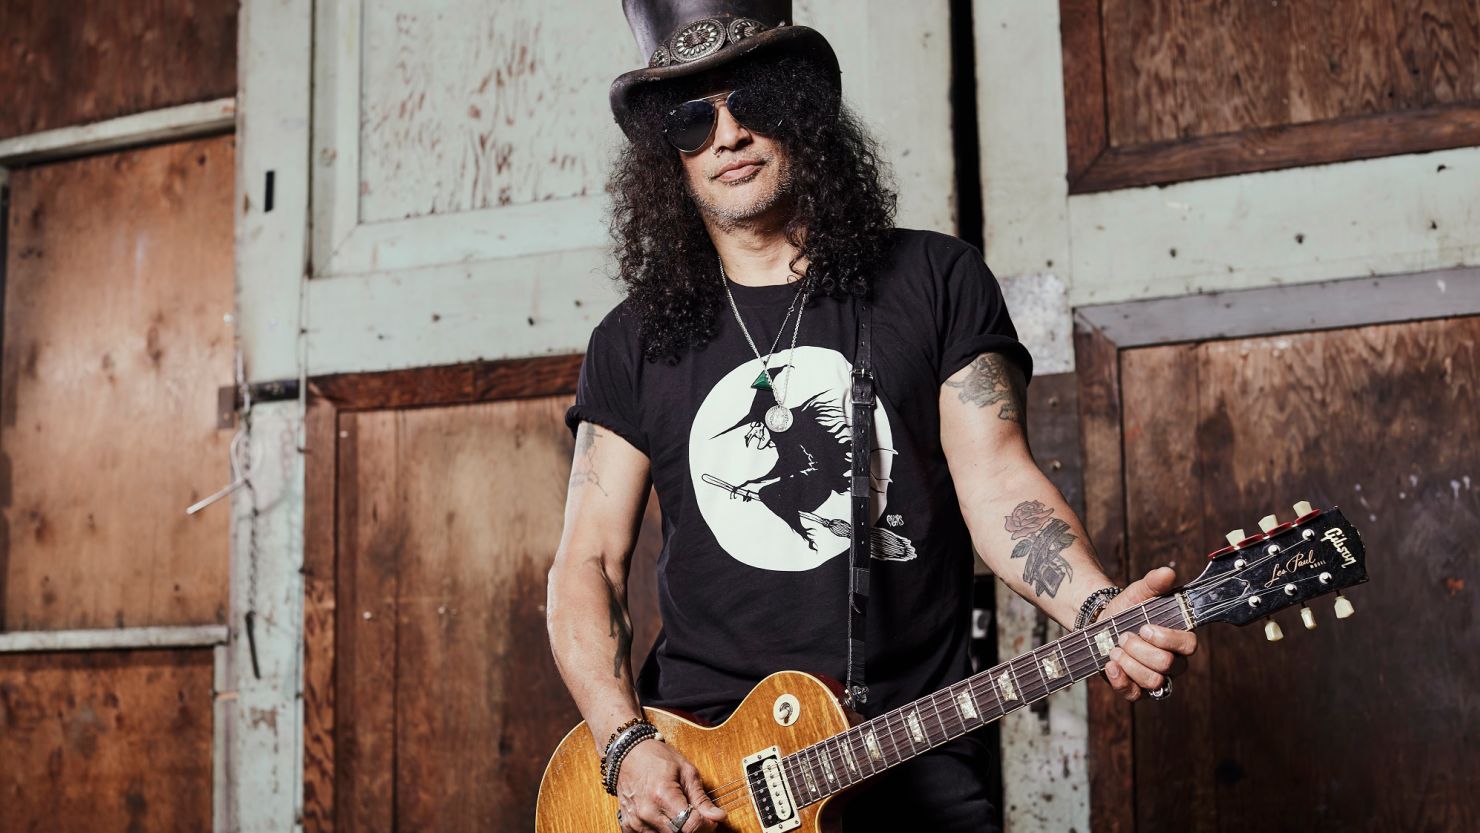 Slash's latest project is his fifth solo album and fourth with Slash Ft. Myles Kennedy & The Conspirators. 